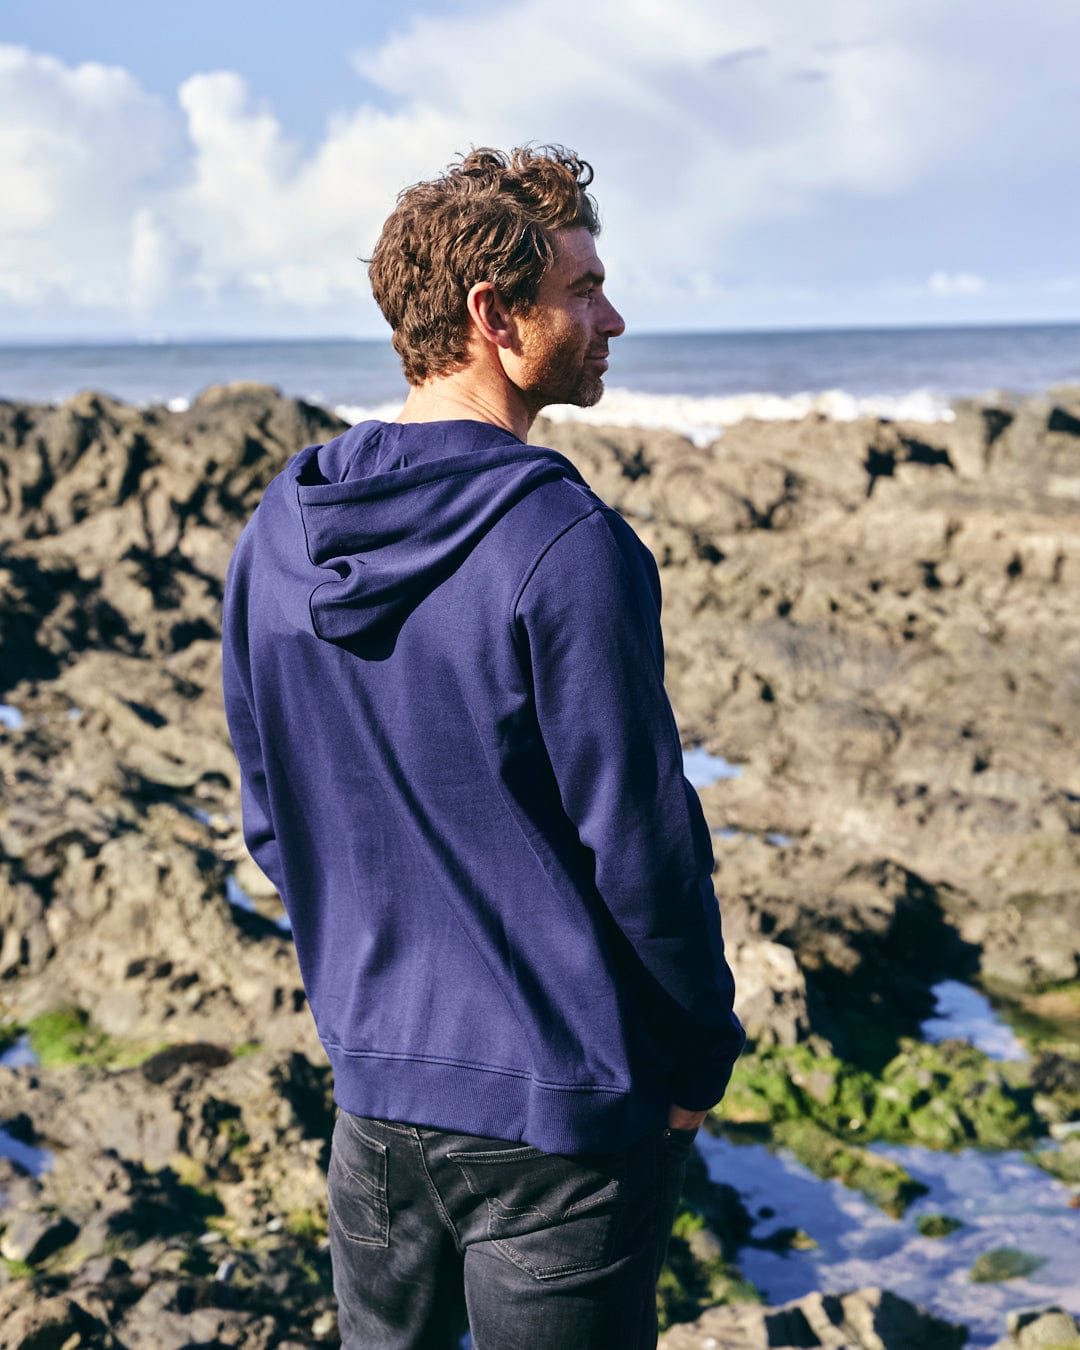 A man standing on rocks looking out to the ocean, wearing a Saltrock Home Run - Mens Zip Hoodie in Blue with drawstring hood.